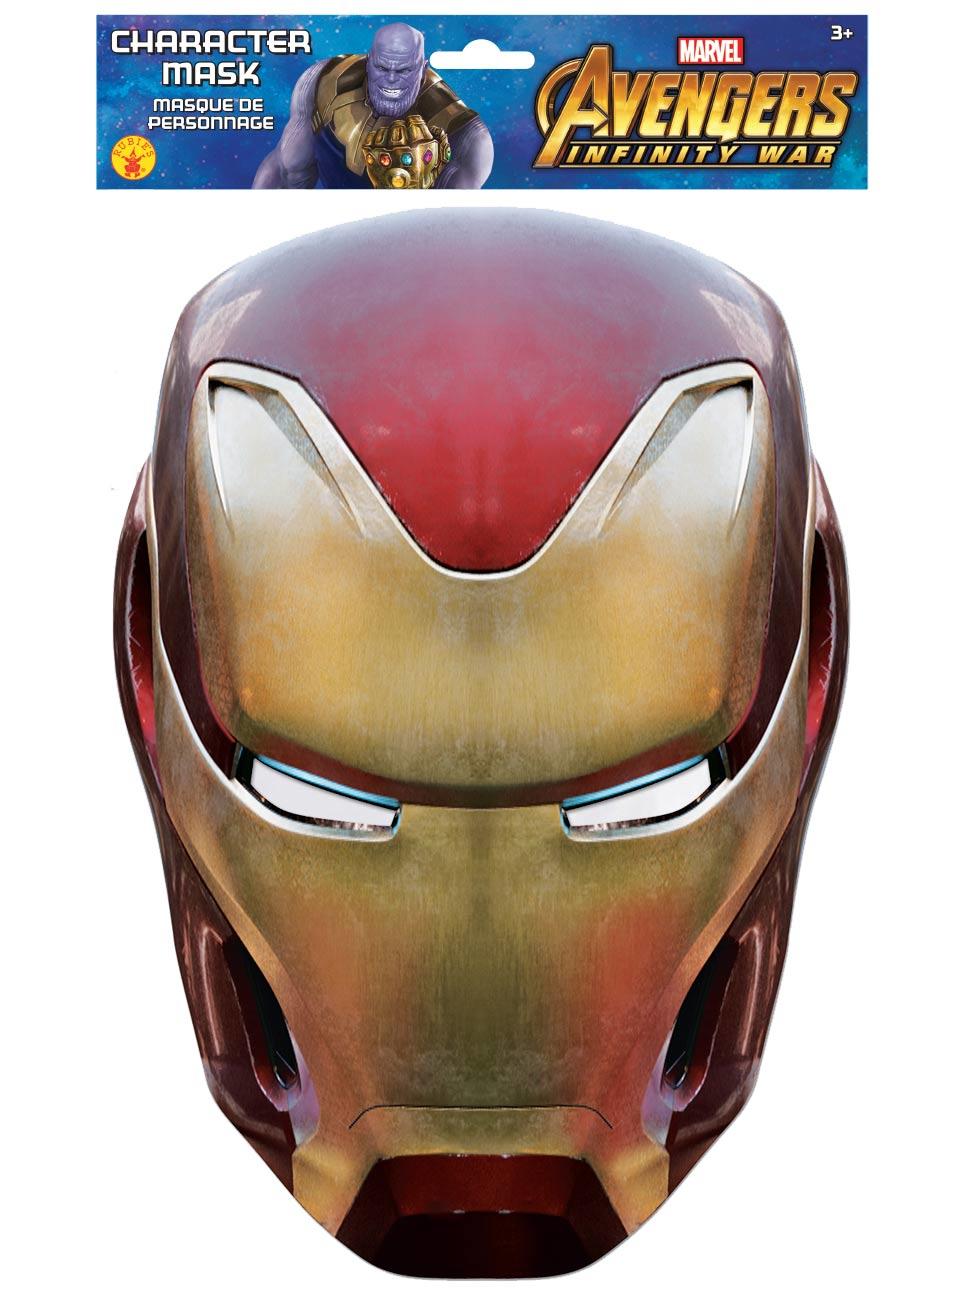 Iron Man Characer Face Mask by Mask-erade 200328 available from the Avengers Infinity War collection here at Karnival Costumes online party shop